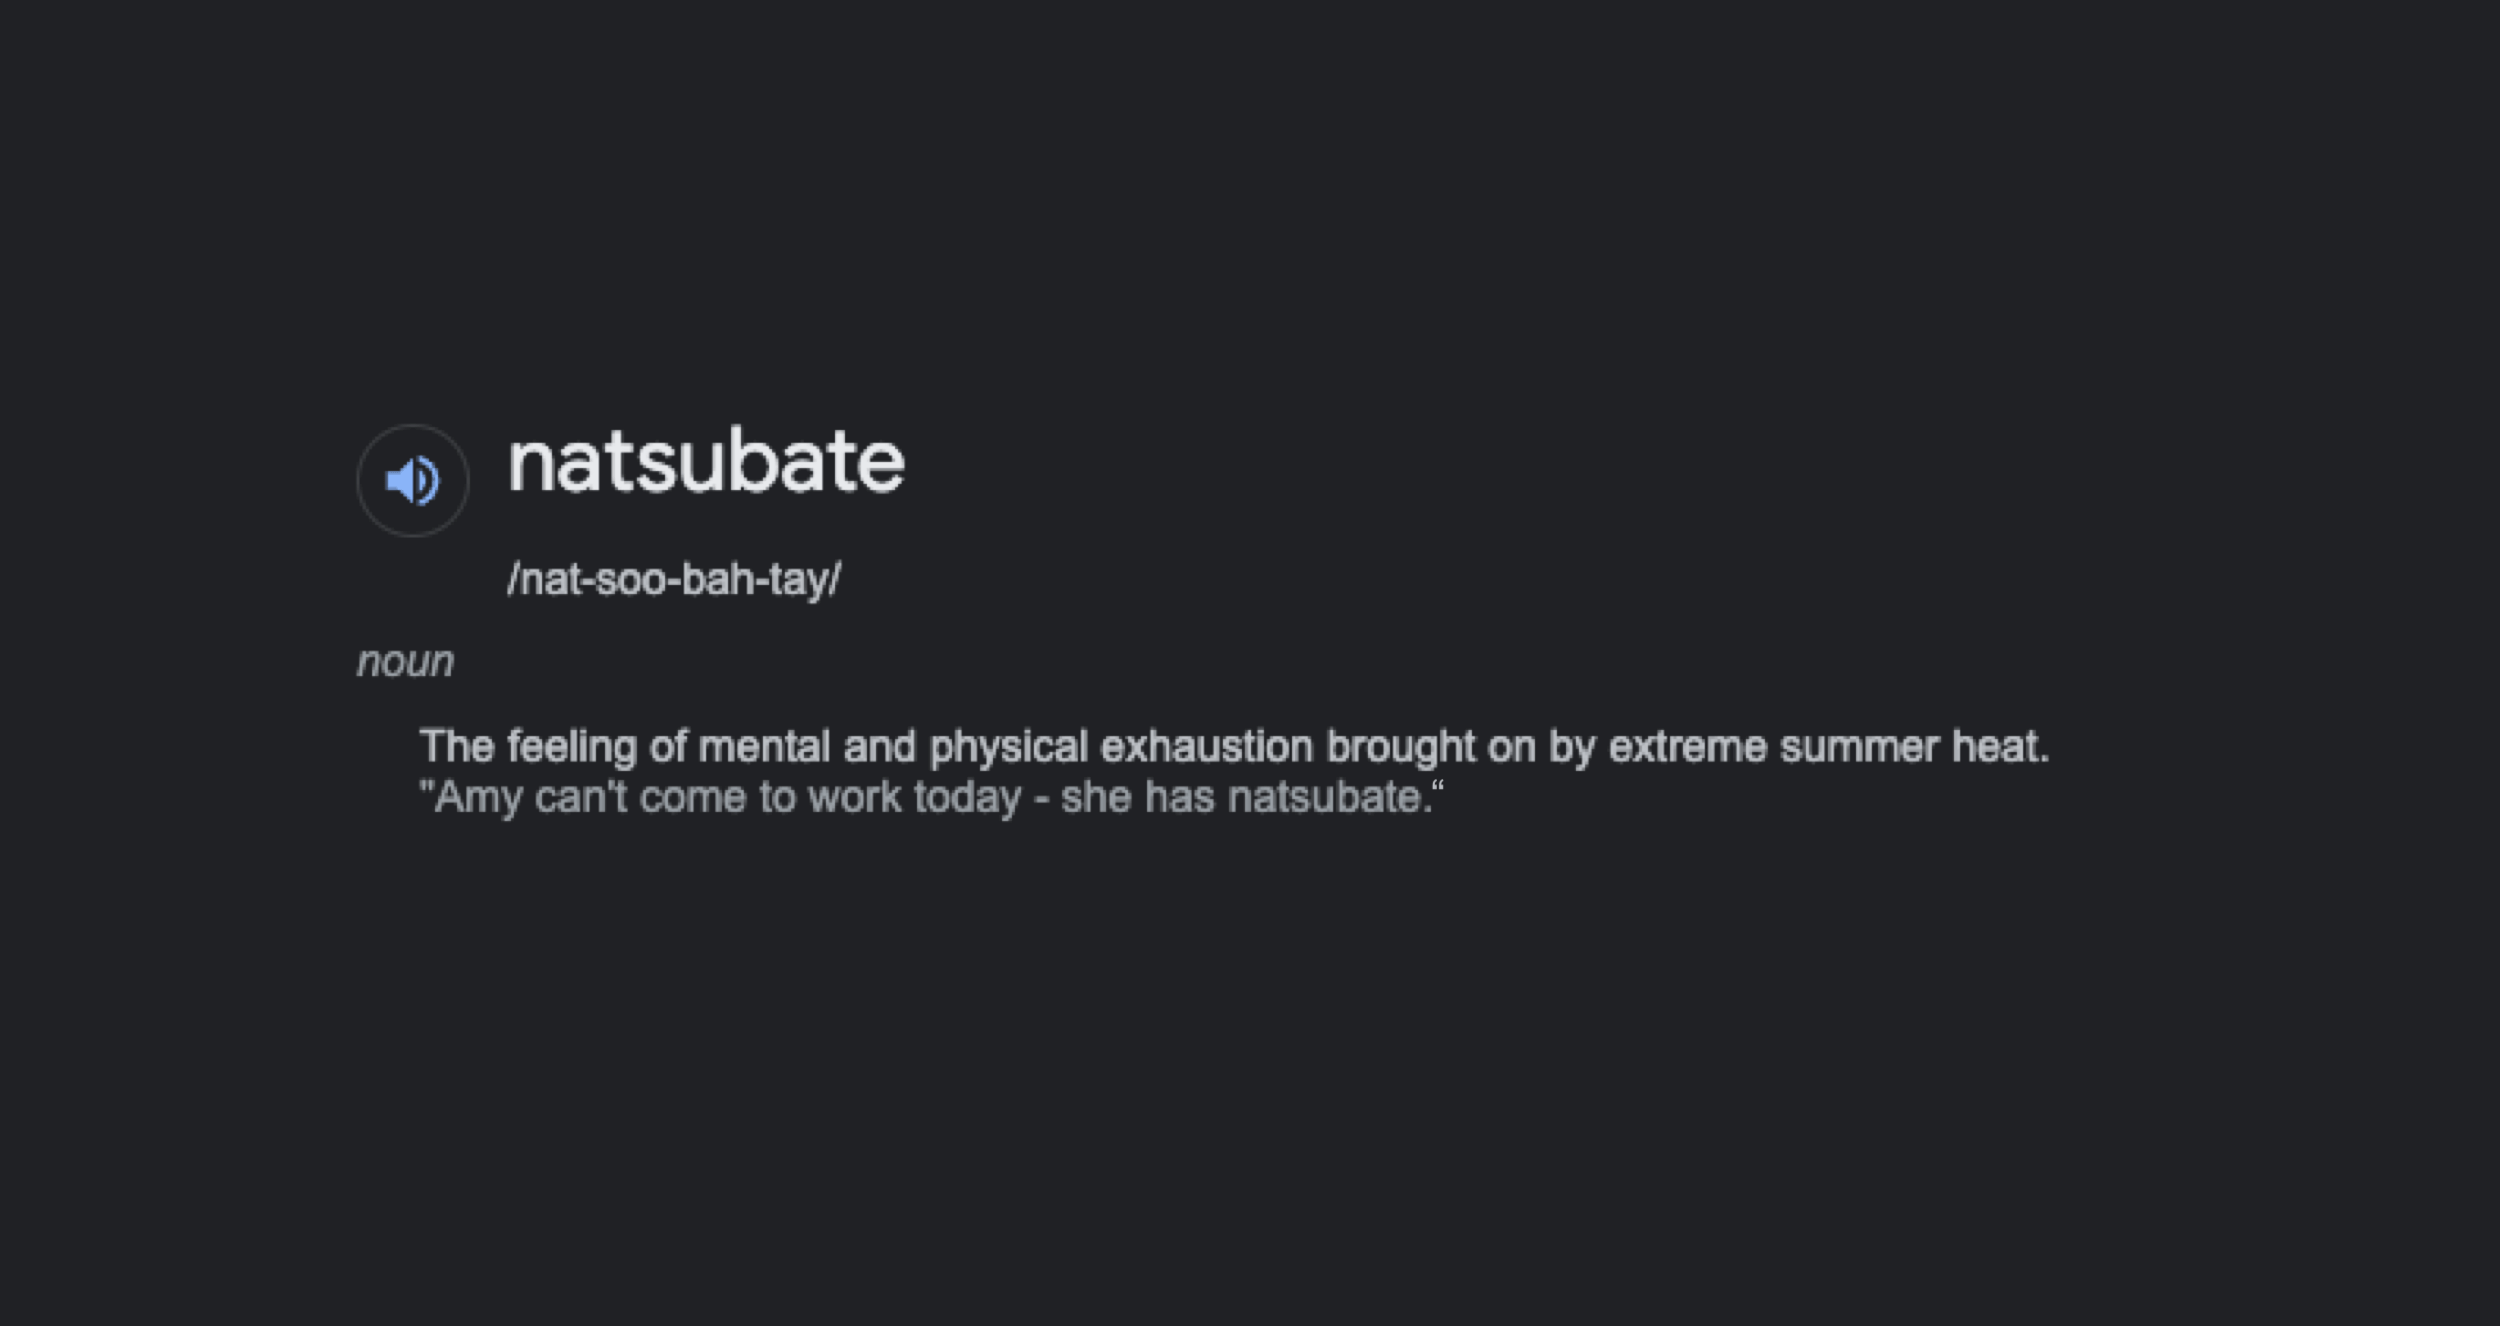 A Google-style dictionary definition of the word 'natsubate' 